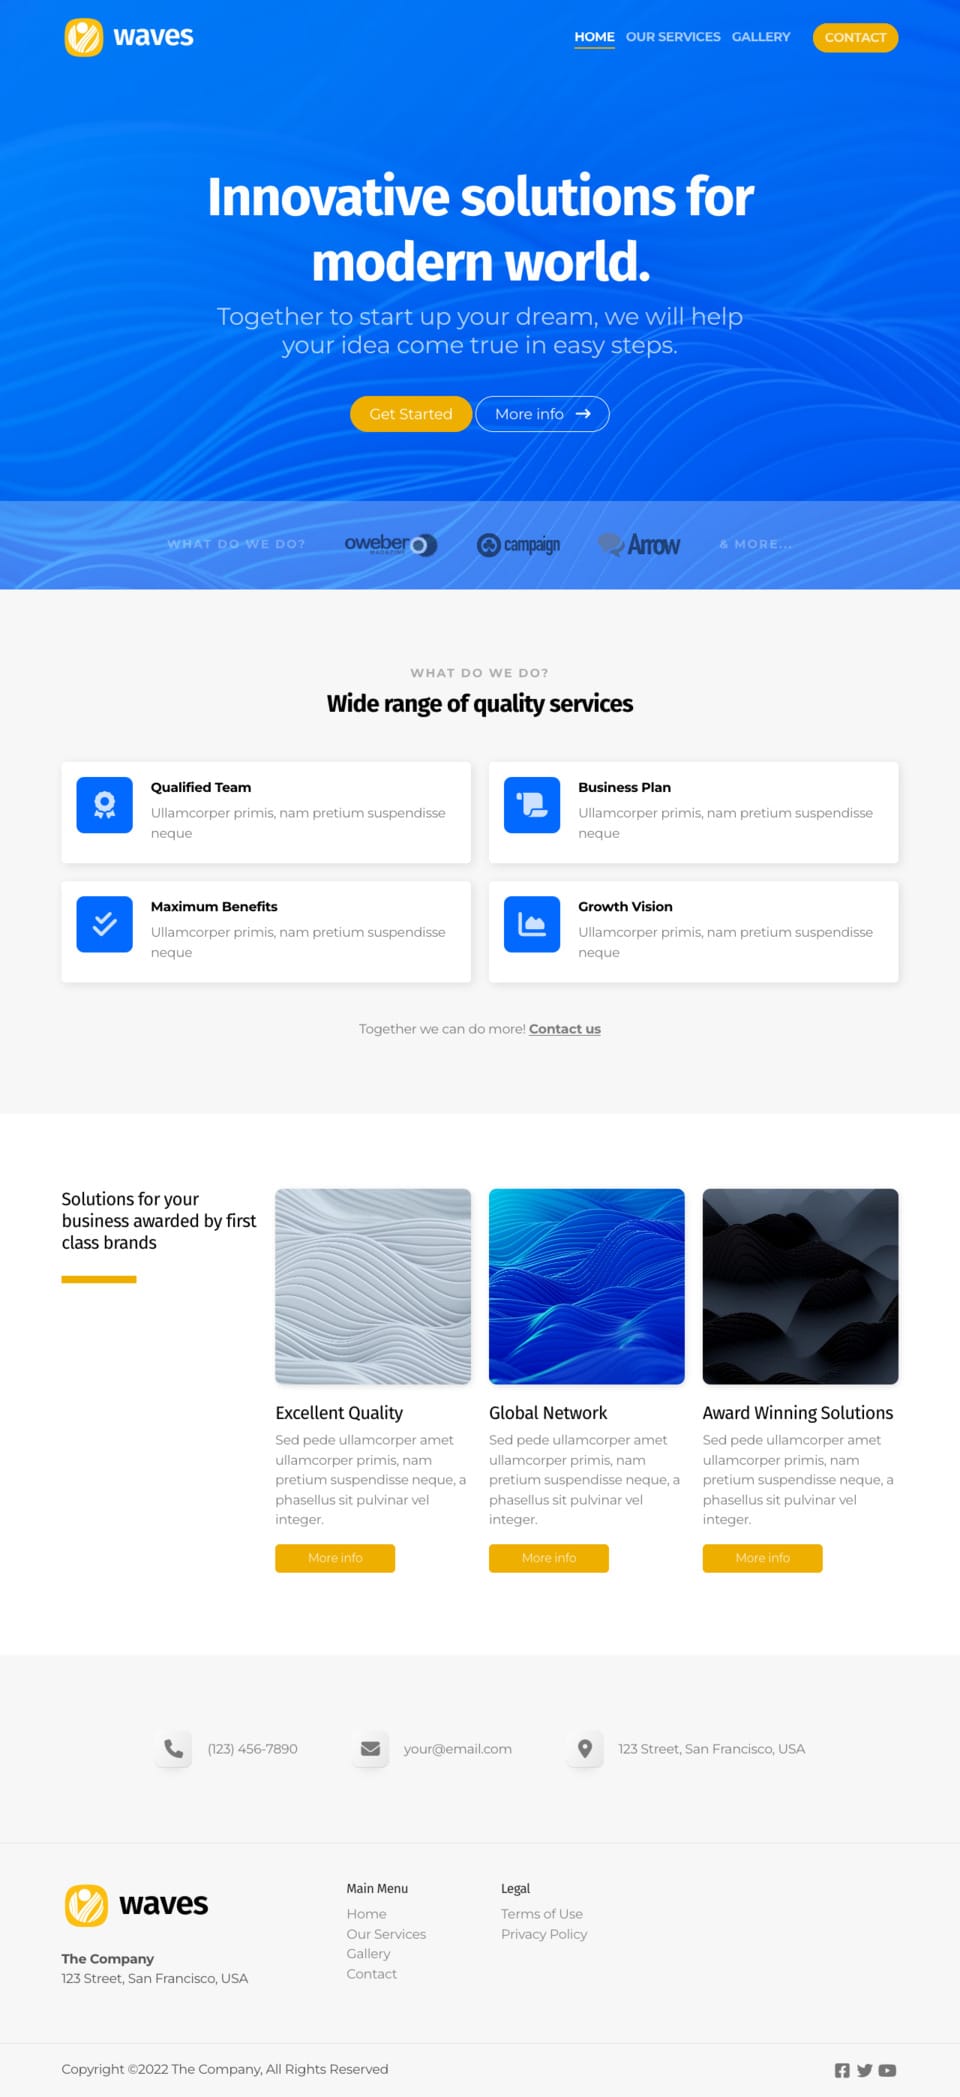 Waves Website Template - Ideal for small businesses, startups, freelancers, and entrepreneurs wanting a tailored website without the hassle of coding.